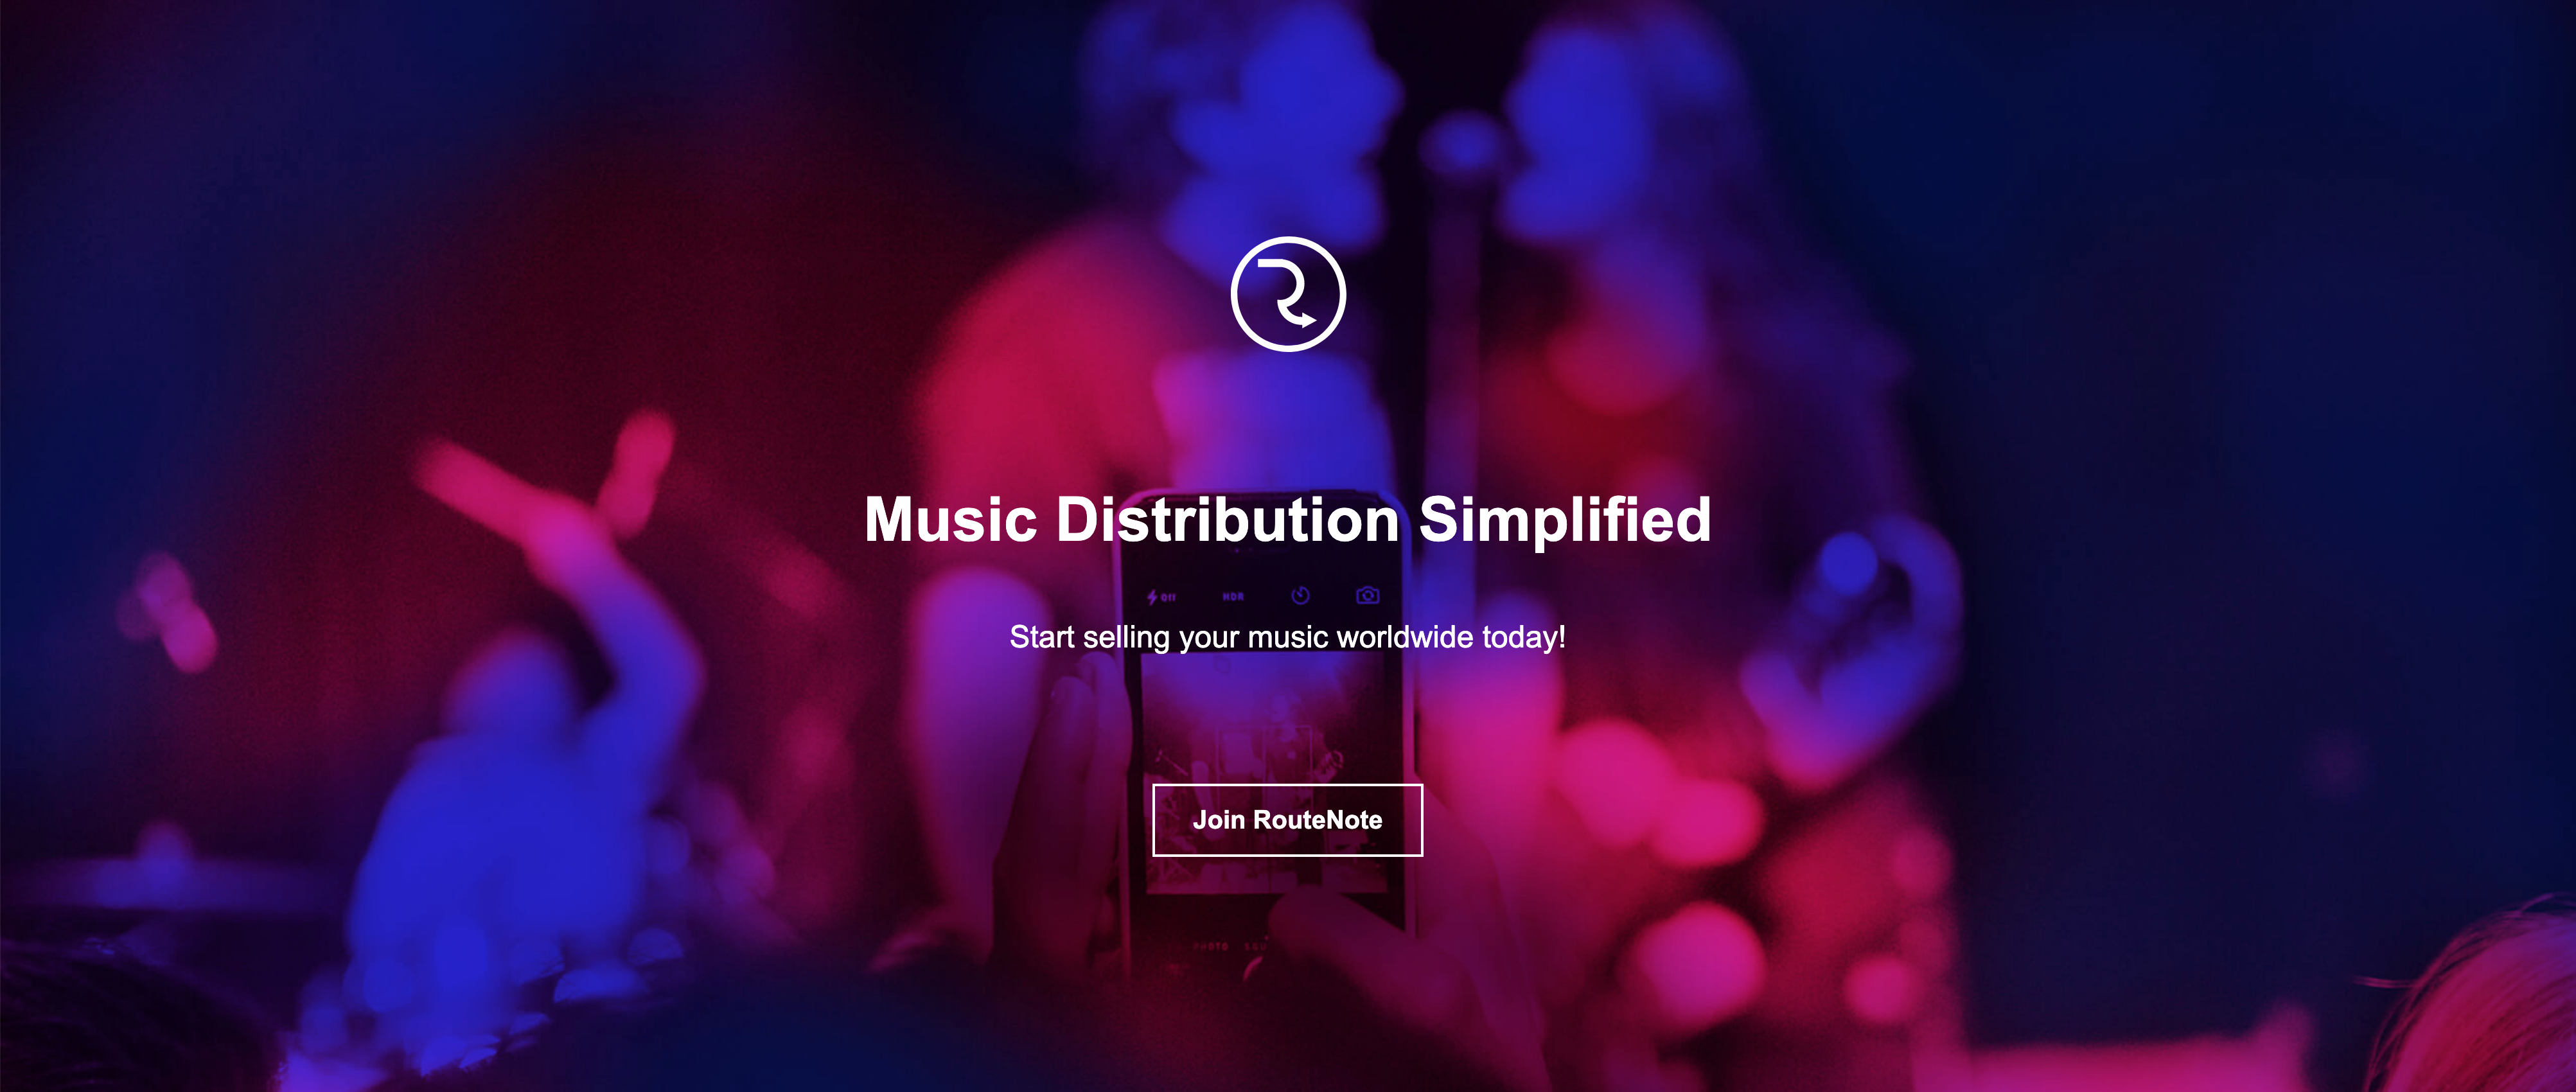 How to distribute music independently for free